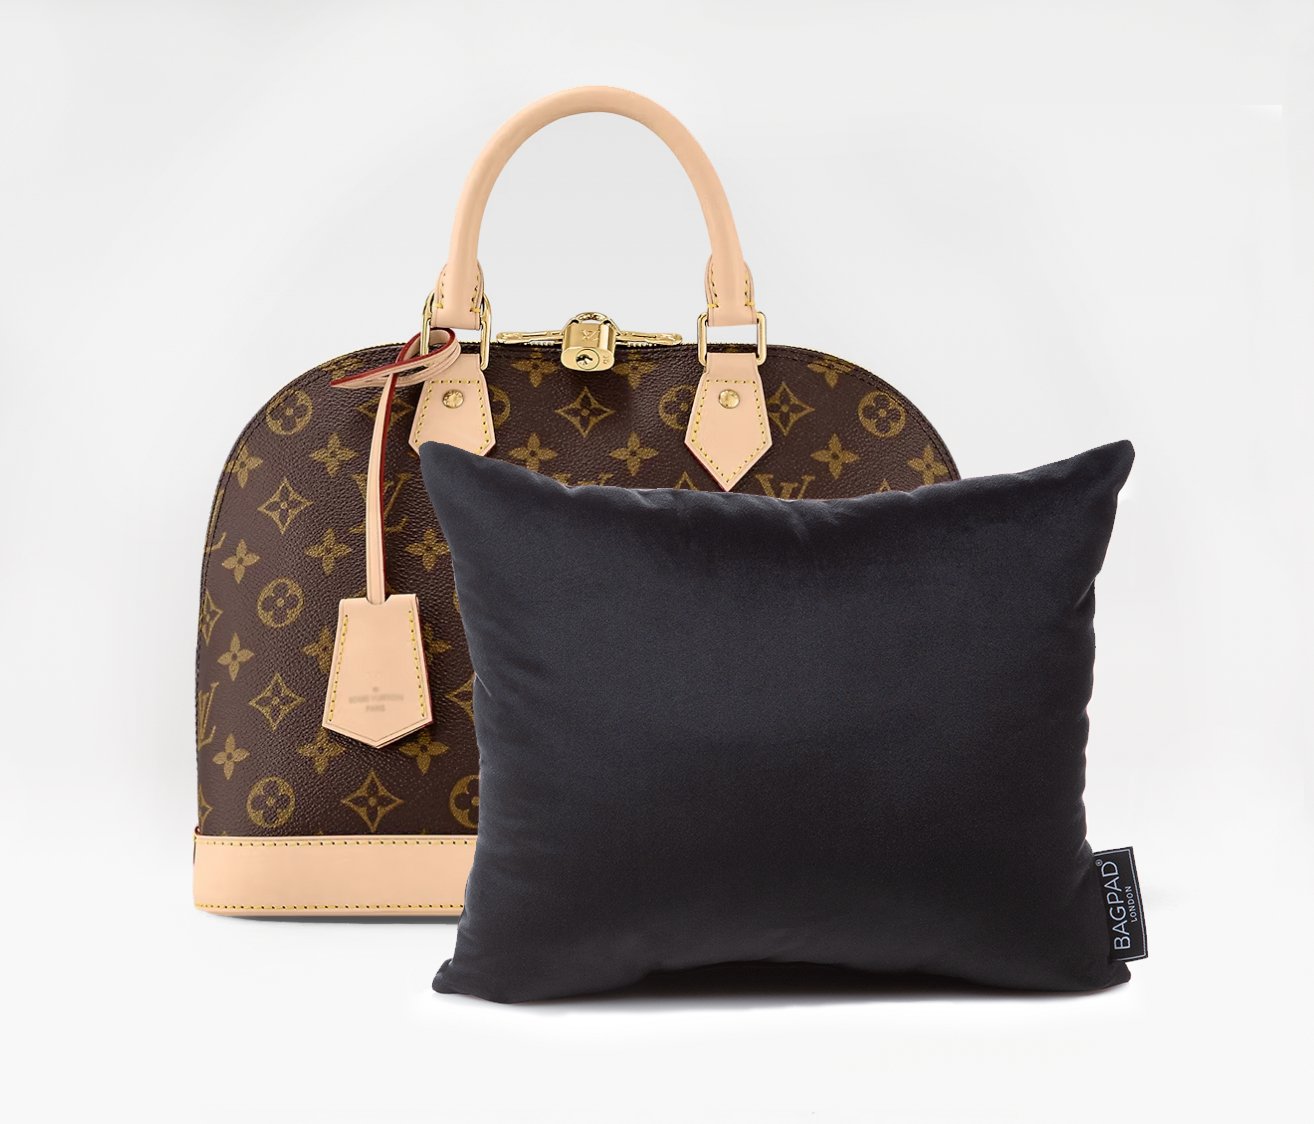 LOUIS VUITTON Alma PM Review & What It Holds